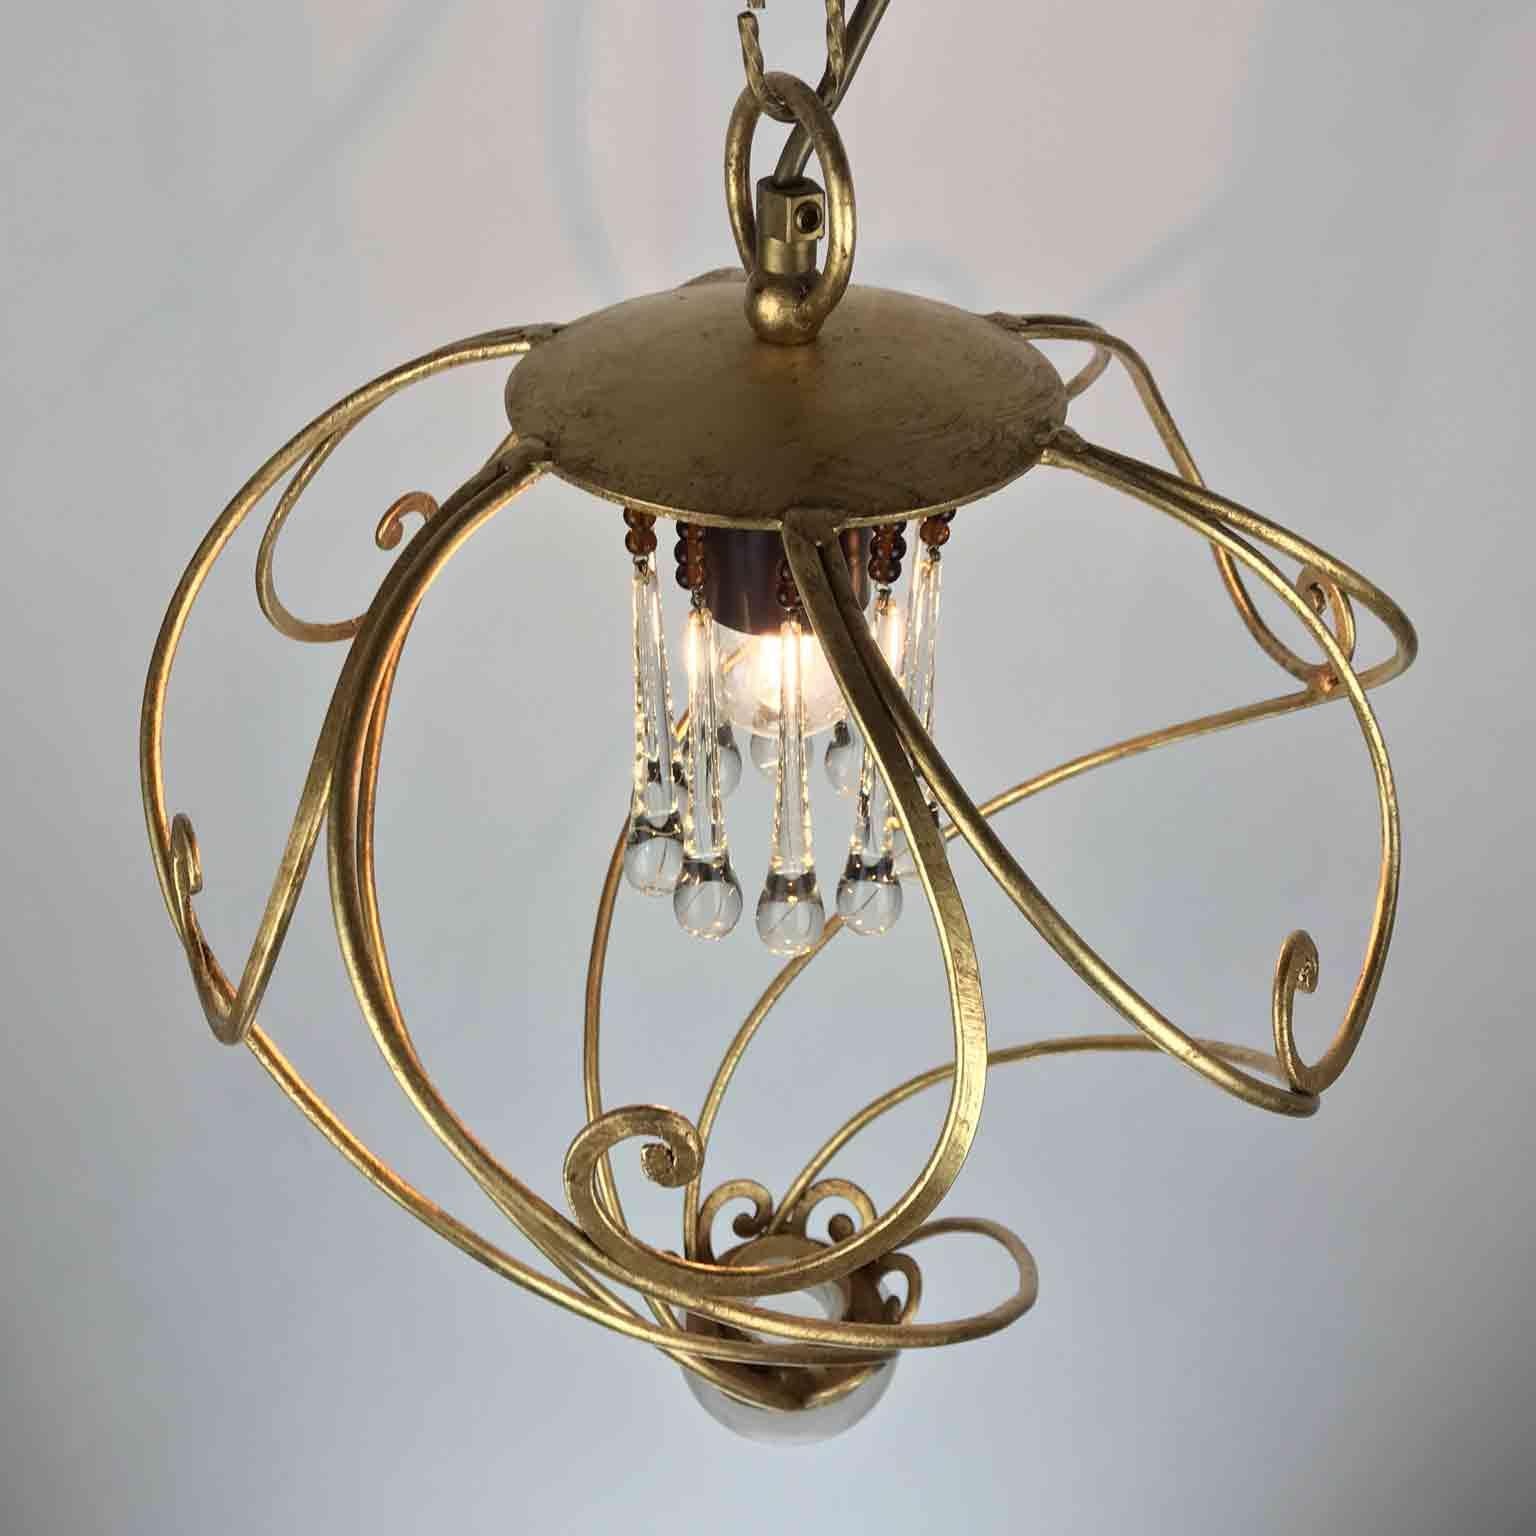 Crystal Italian Spiral Shaped Chandelier by Banci Firenze Leaf Gilded Cage 1980s